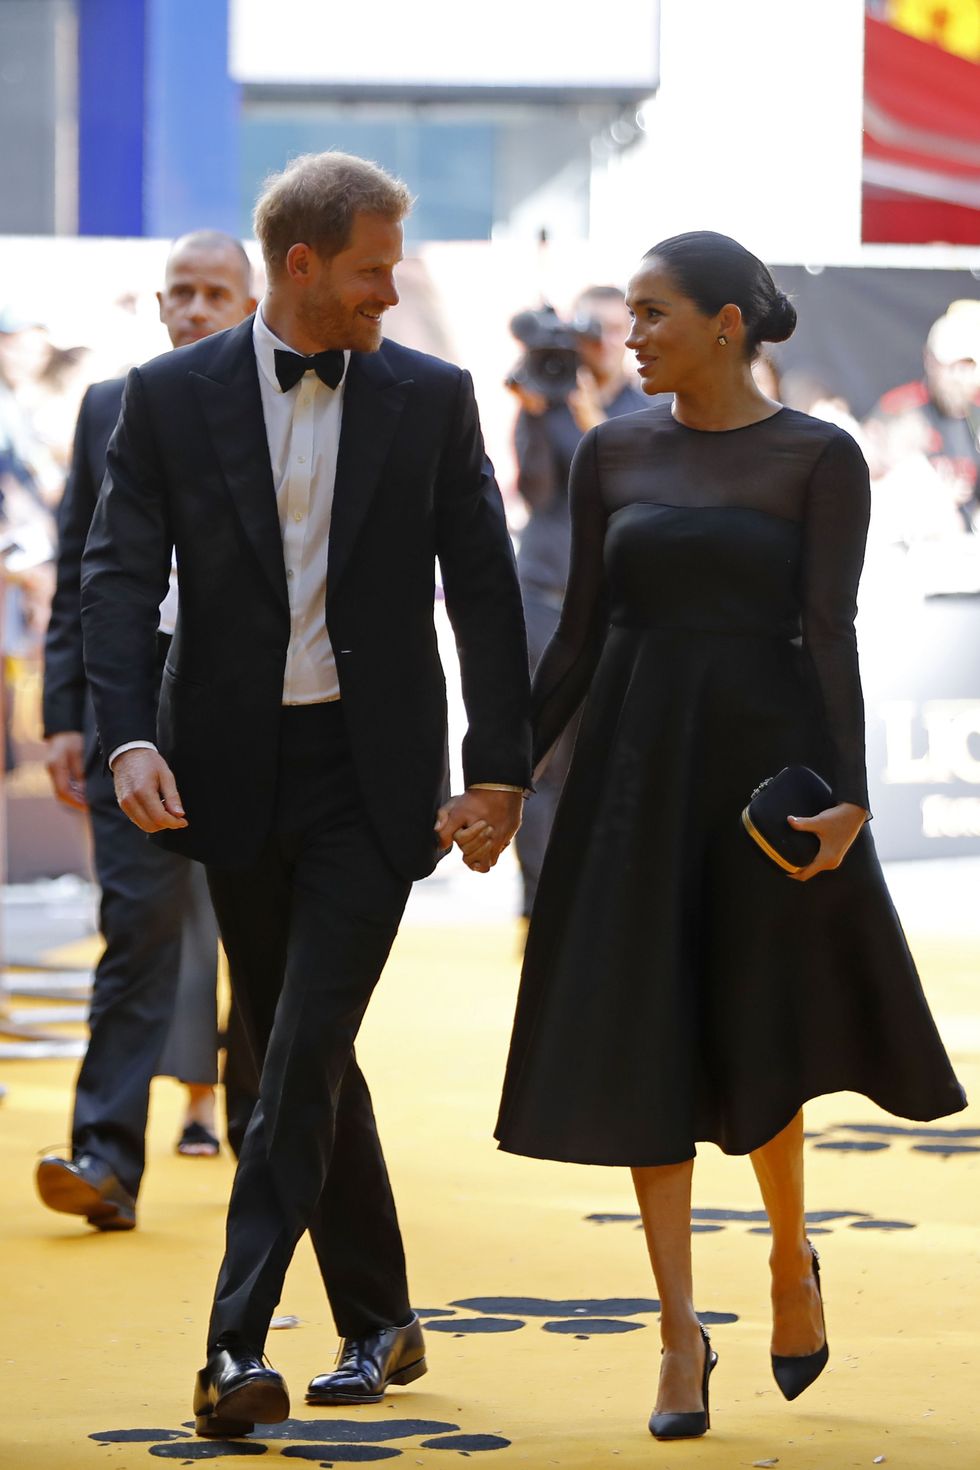 Duke and Duchess Sussex Harry and Meghan